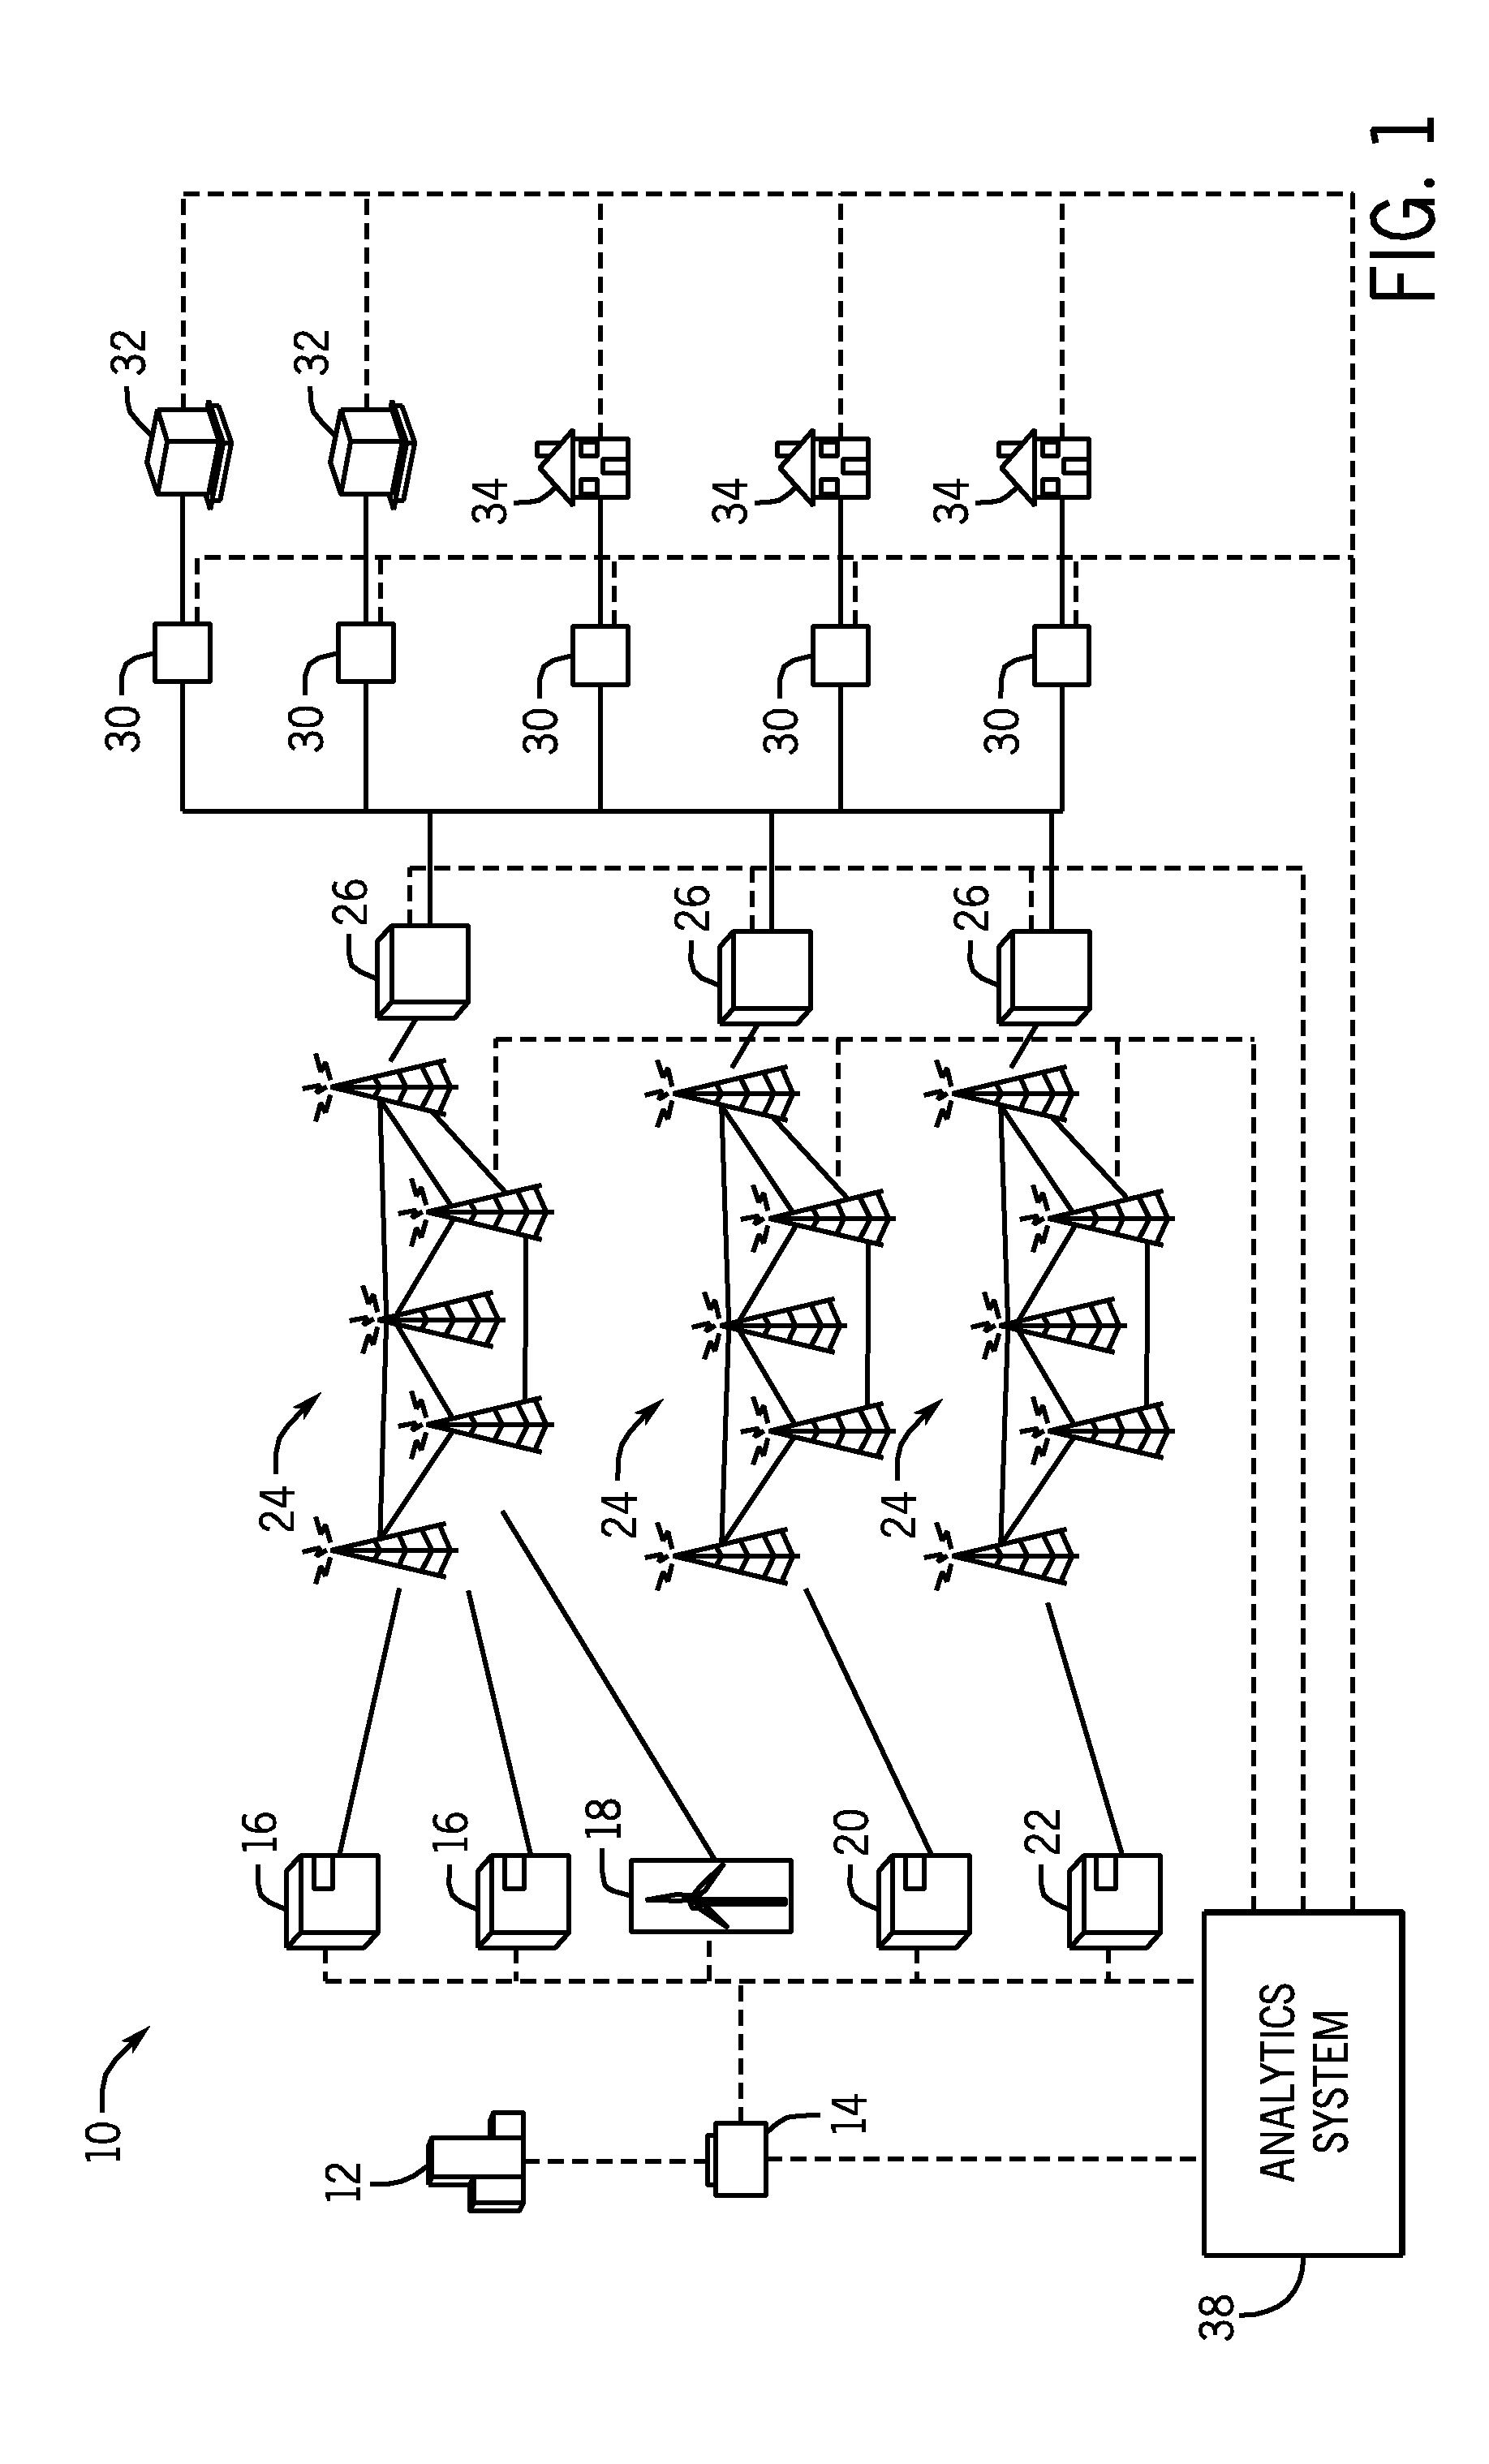 Methods and systems for estimating recoverable utility revenue